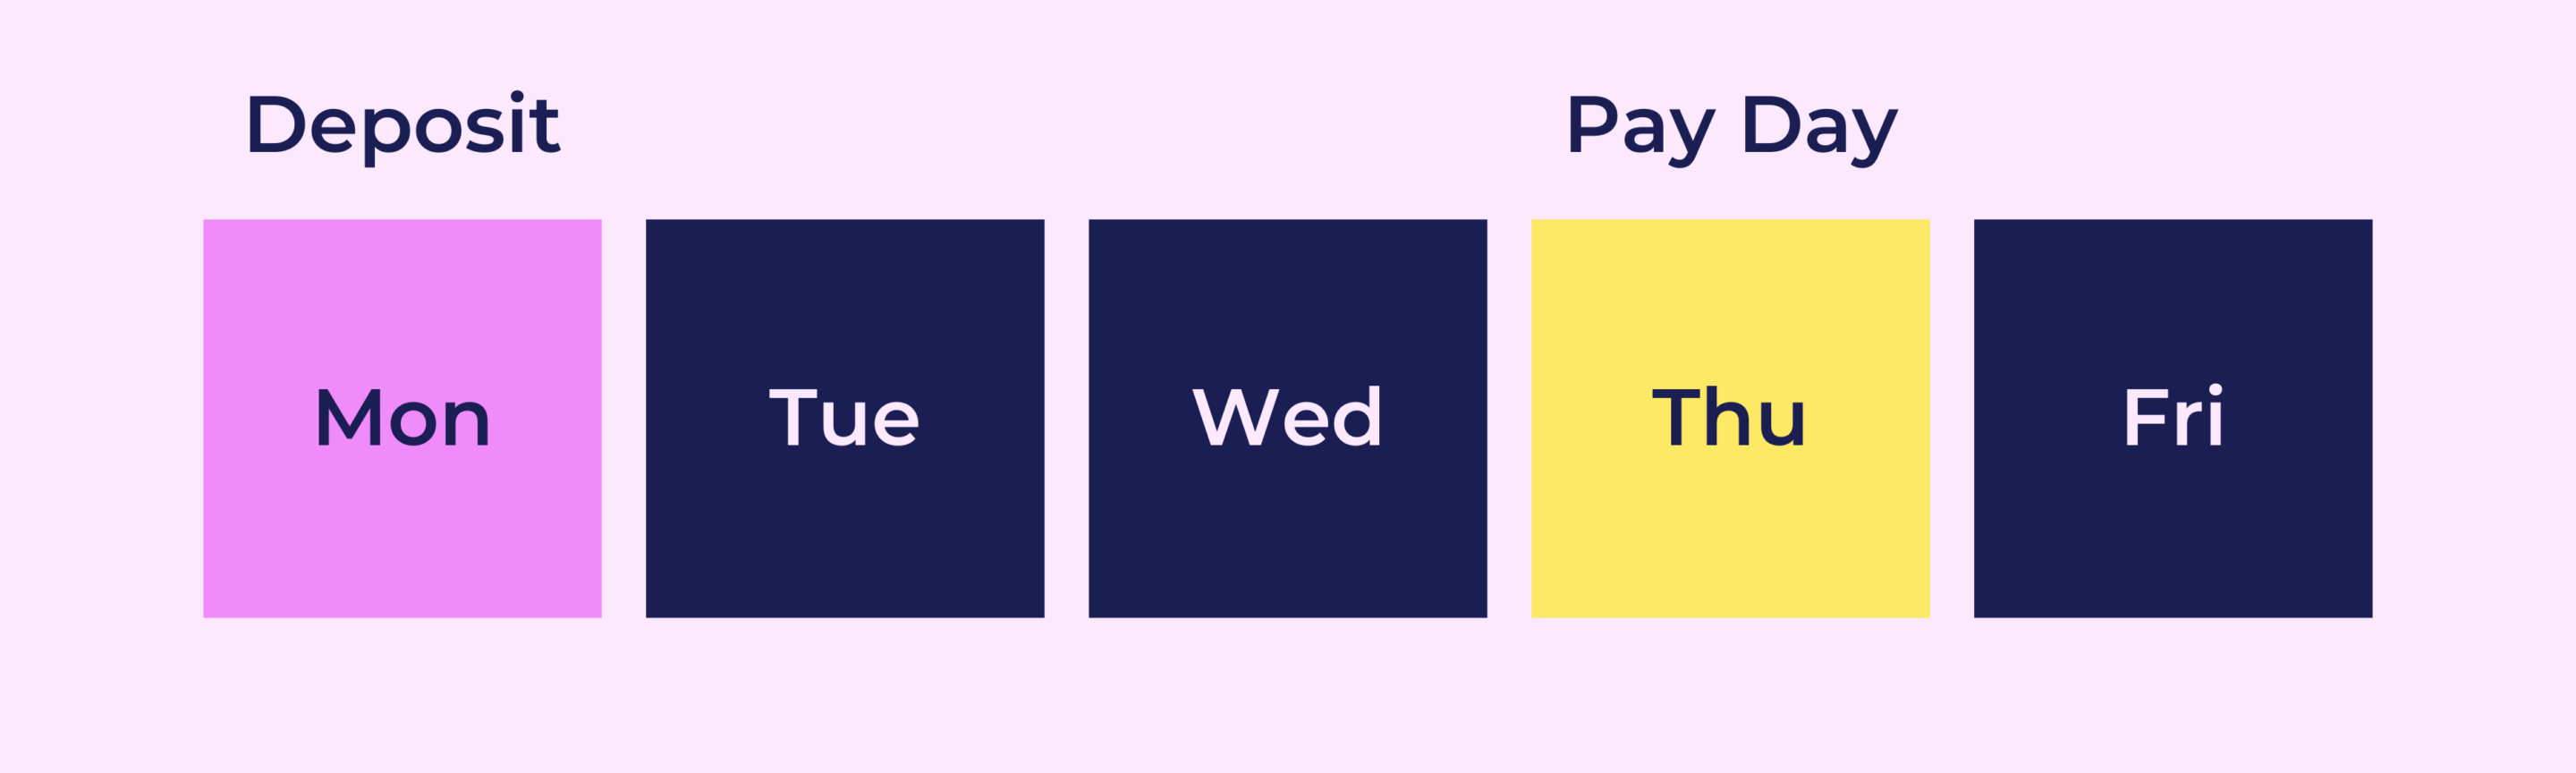 2 Day Plan diagram showing the deposit on Monday and the pay day on Thursday